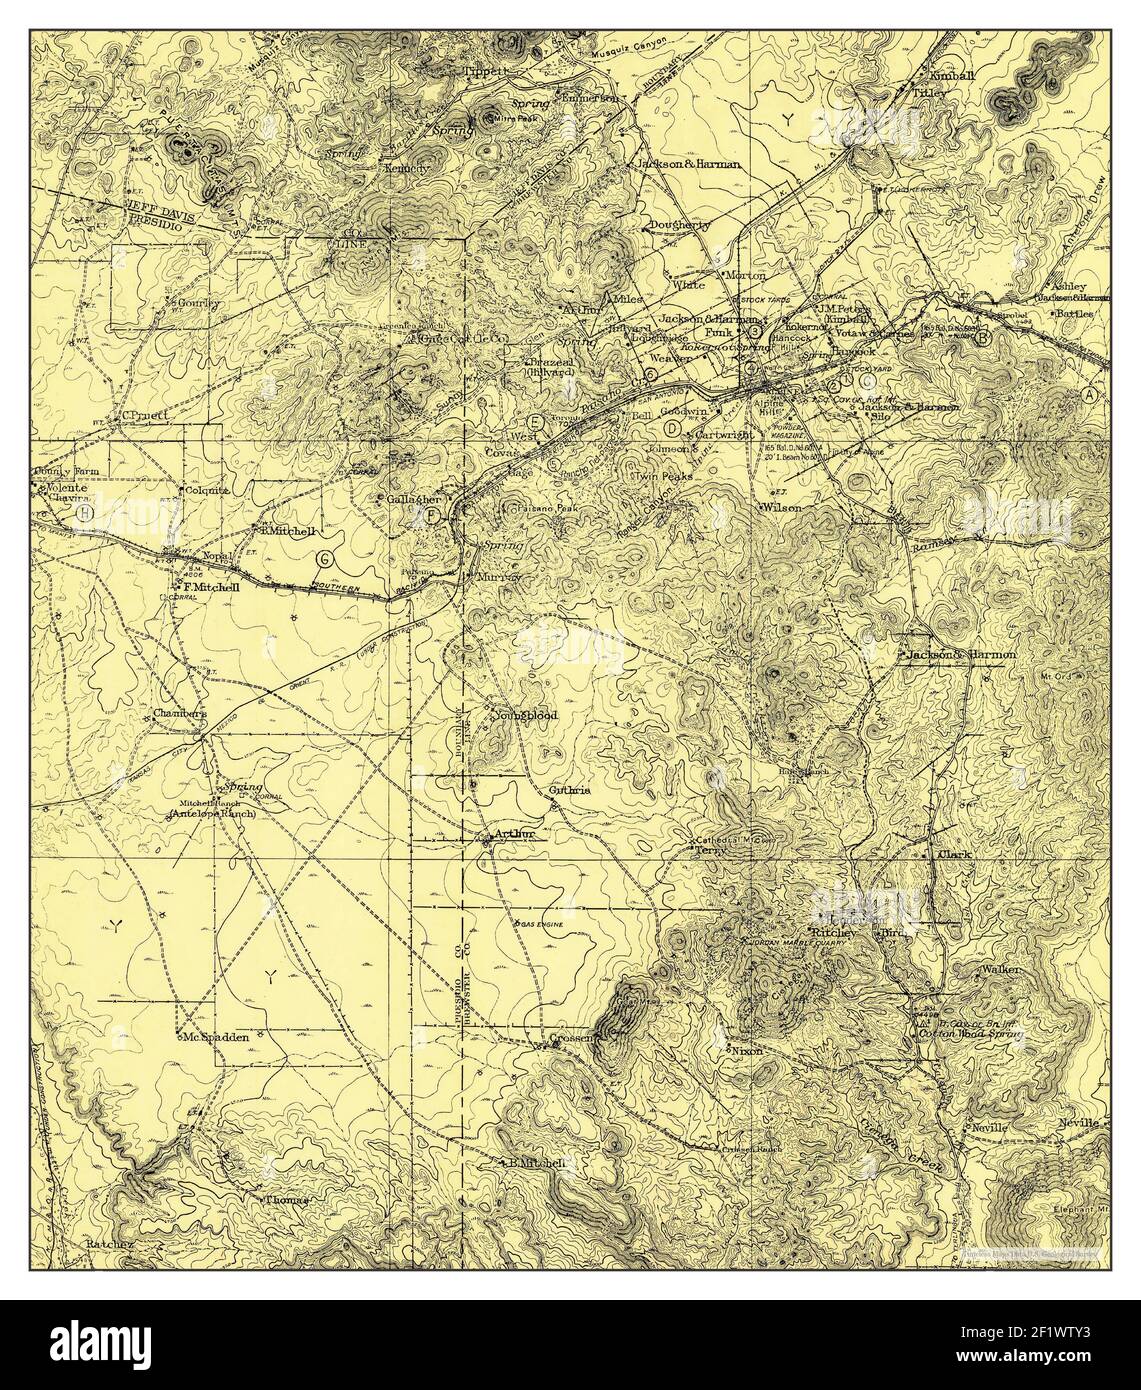 Alpine Texas Map 1895 1125000 United States Of America By Timeless Maps Data Us Geological Survey 2F1WTY3 